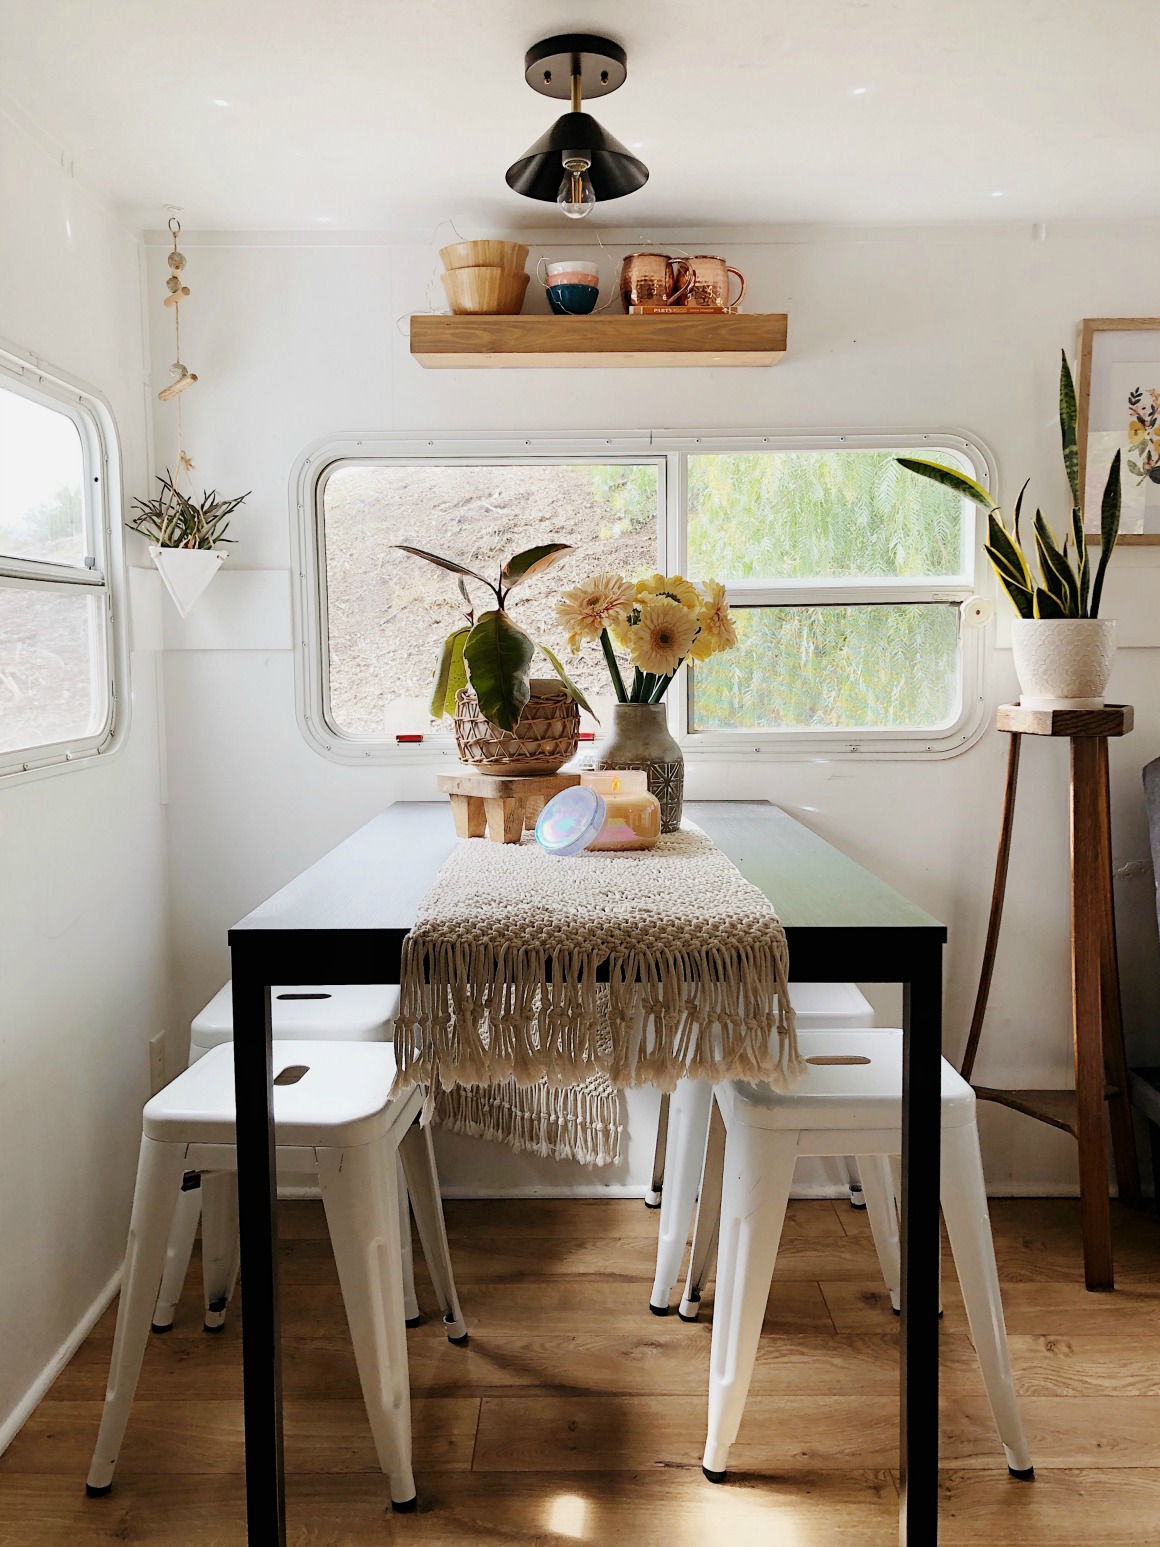 Small Space Living- What living in an RV looks like!